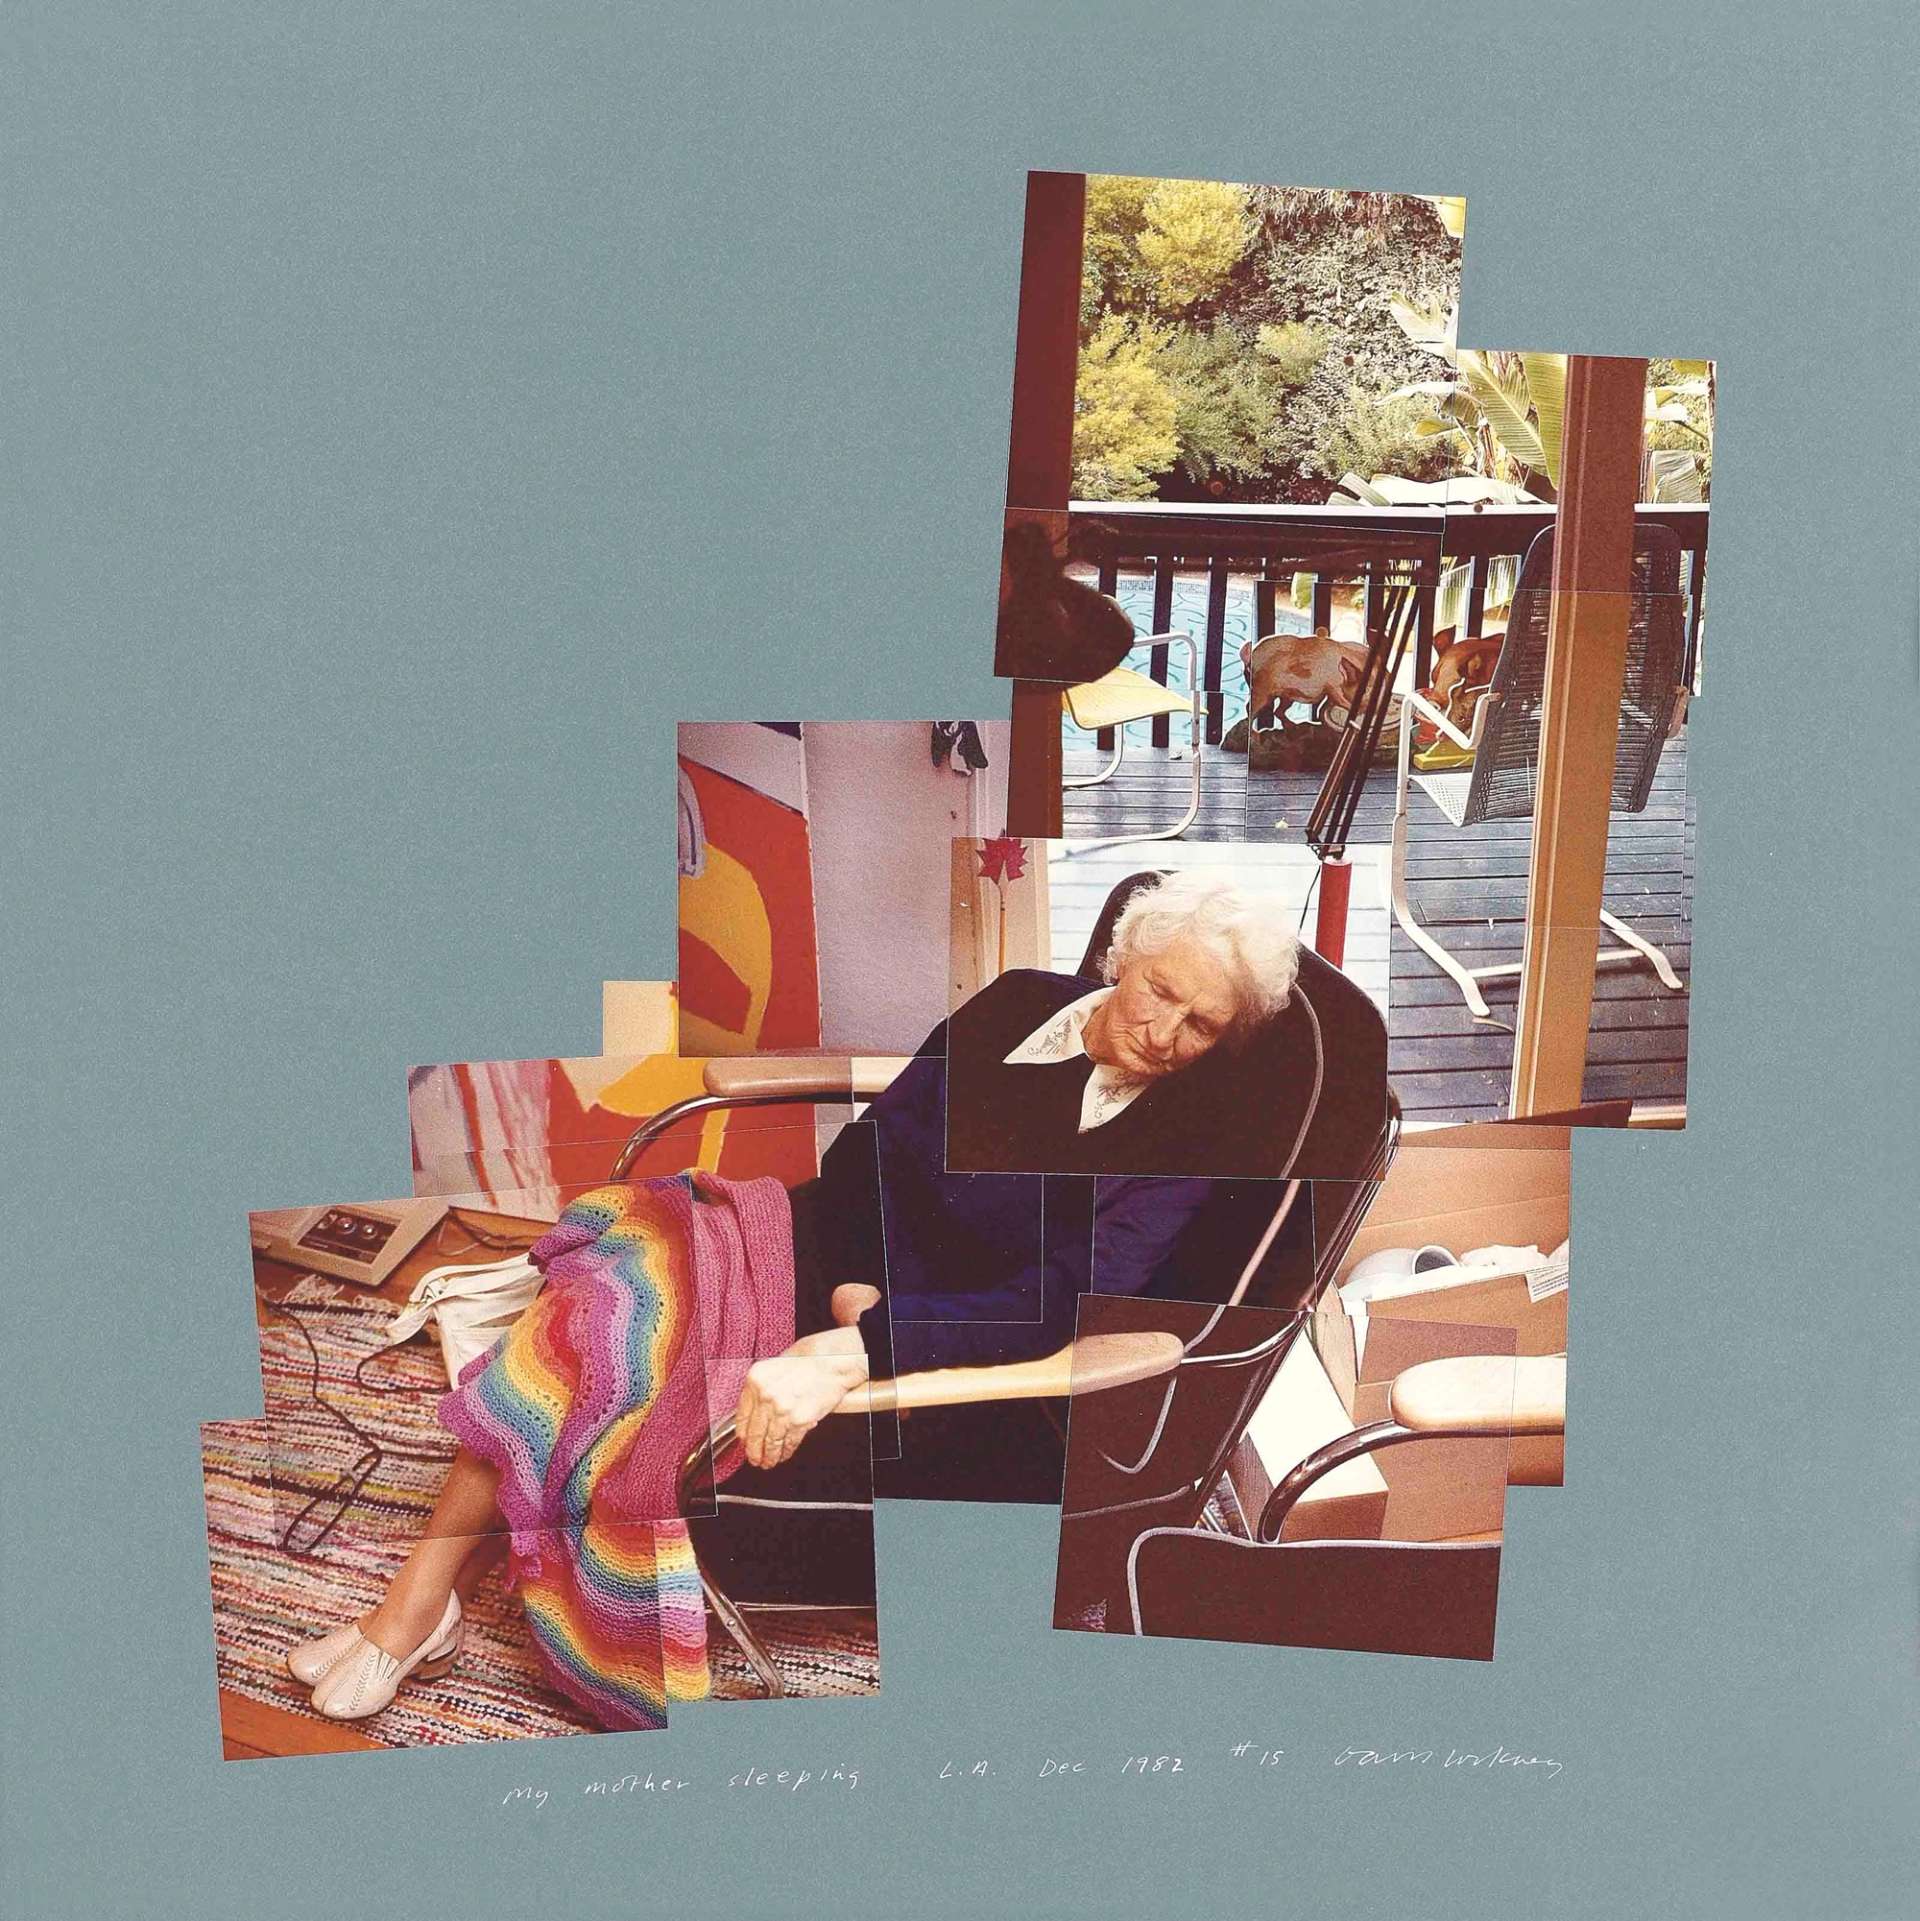 David Hockney’s My Mother Sleeping, Los Angeles. A photographic print of a collage of images. There is an older woman with white hair sleeping in a black chair with a rainbow patterned blanket over her legs. She is in front of her patio. 